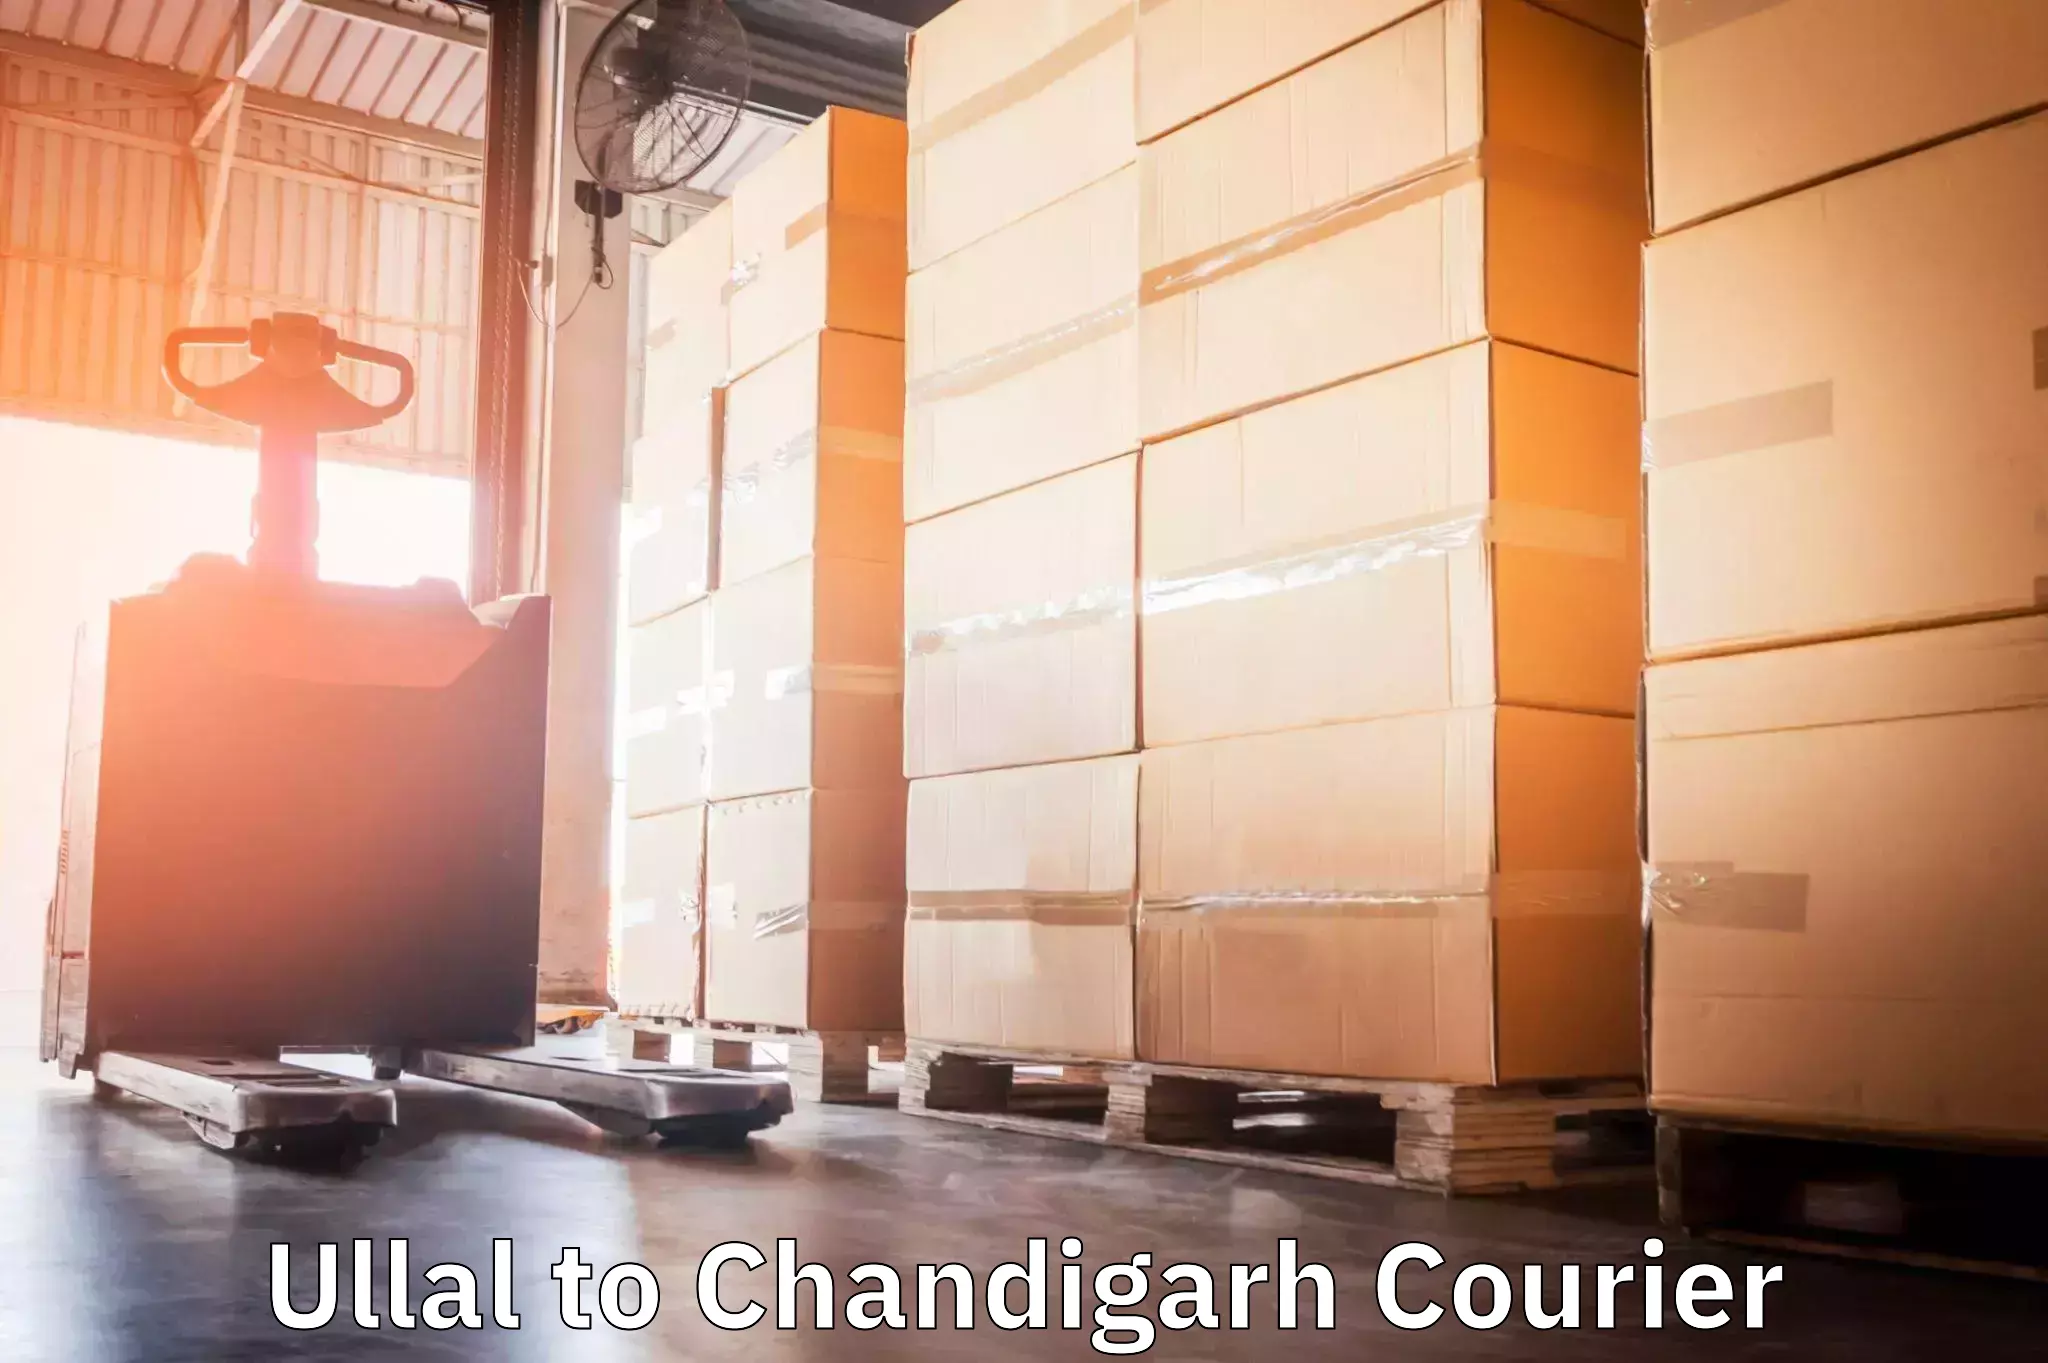 Pharmaceutical courier Ullal to Chandigarh